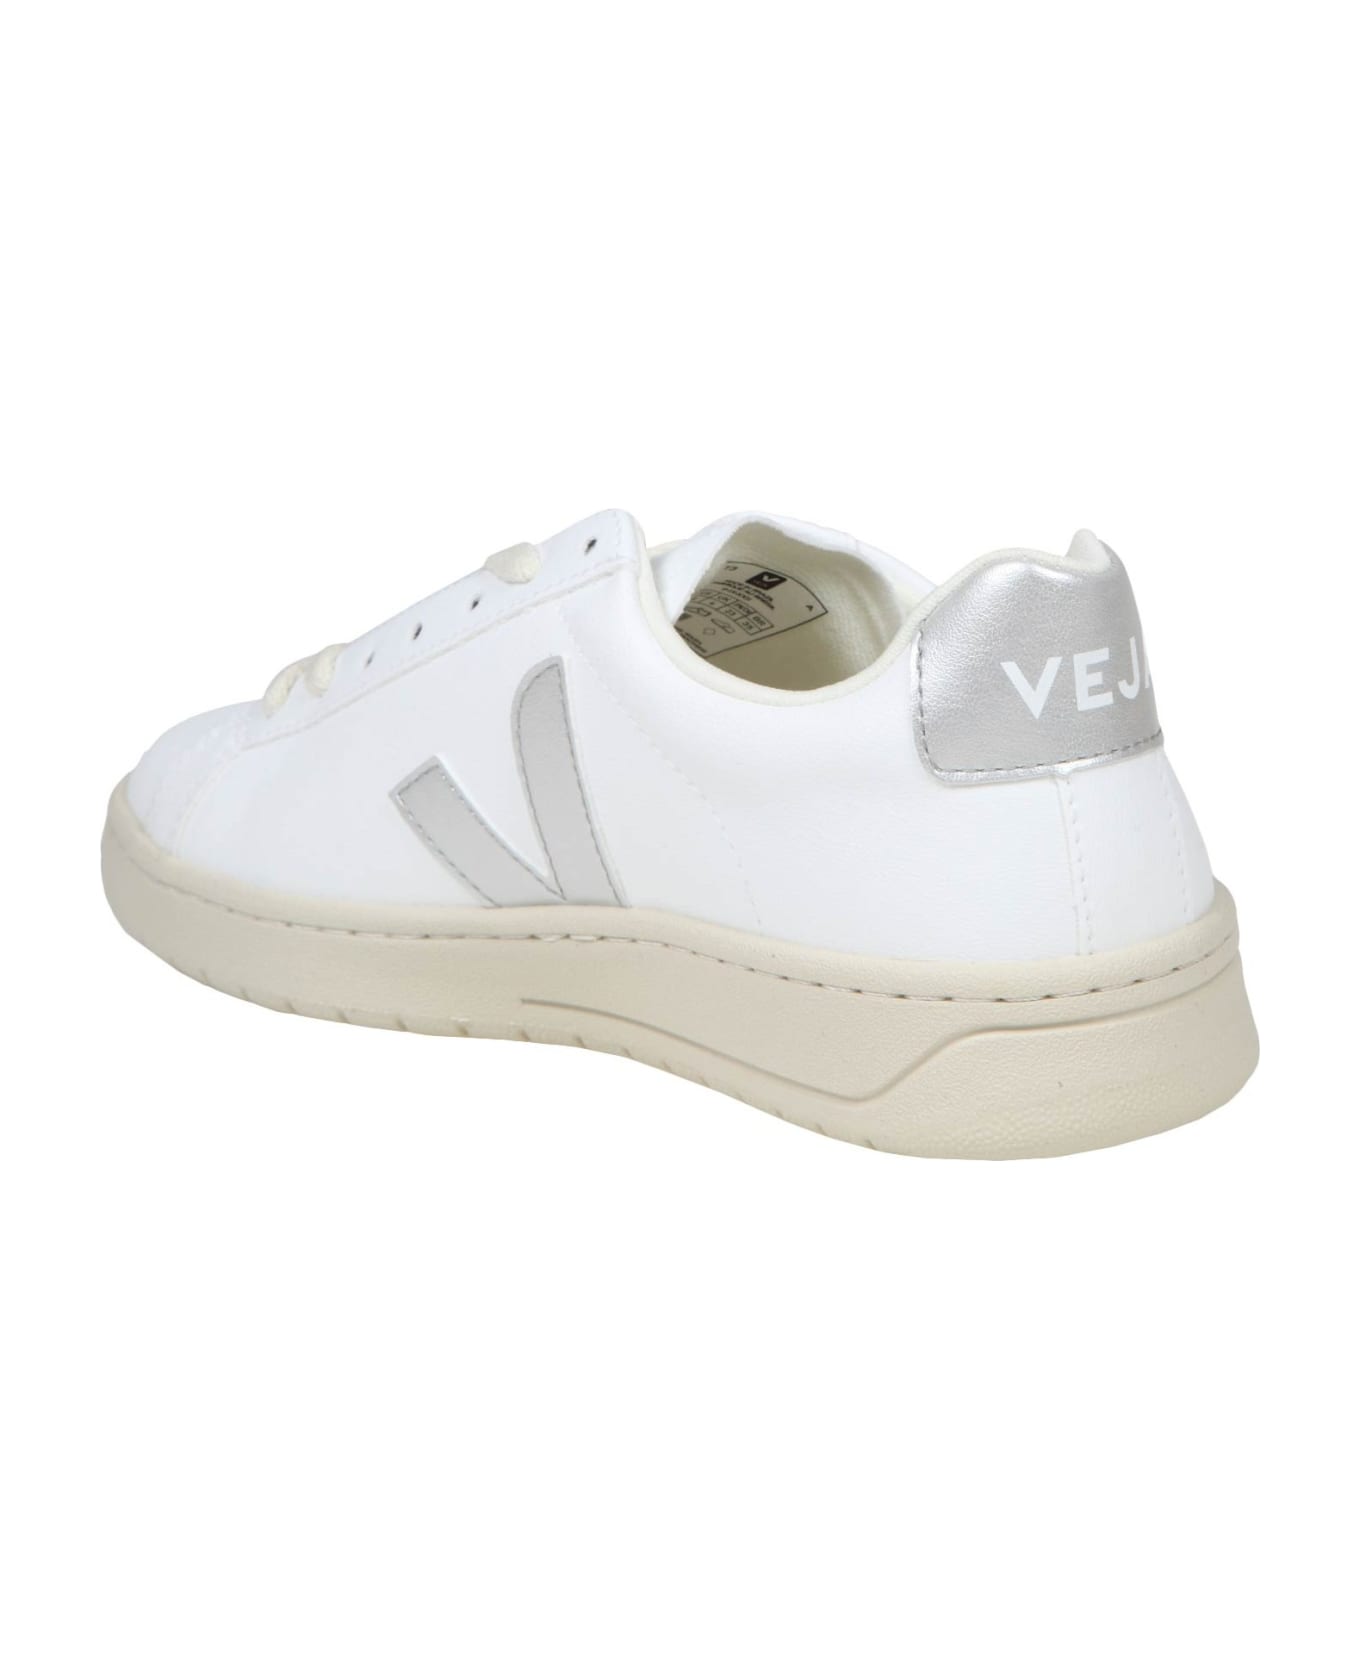 Veja Urca Sneakers In White And Silver Leather